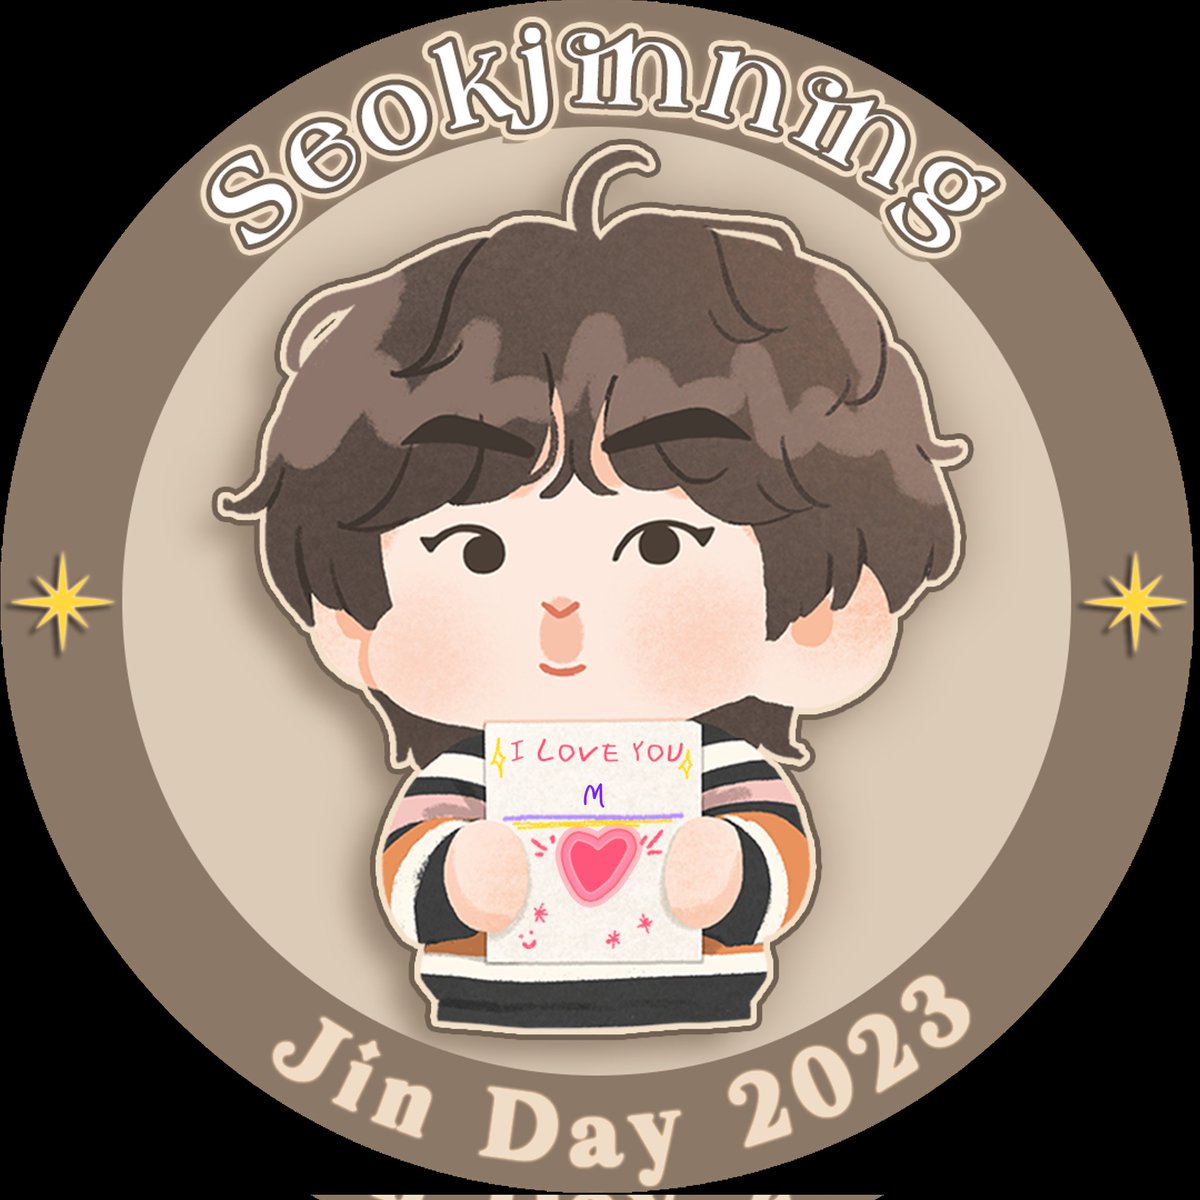 late tweet but i have made my submission to #OurSeokjinningTimePt2 thank you for your letting us be a part of this @bemyjinnie @jinjoo_bts @abyssyoonjin can't wait for seokjinnie's bday 💜